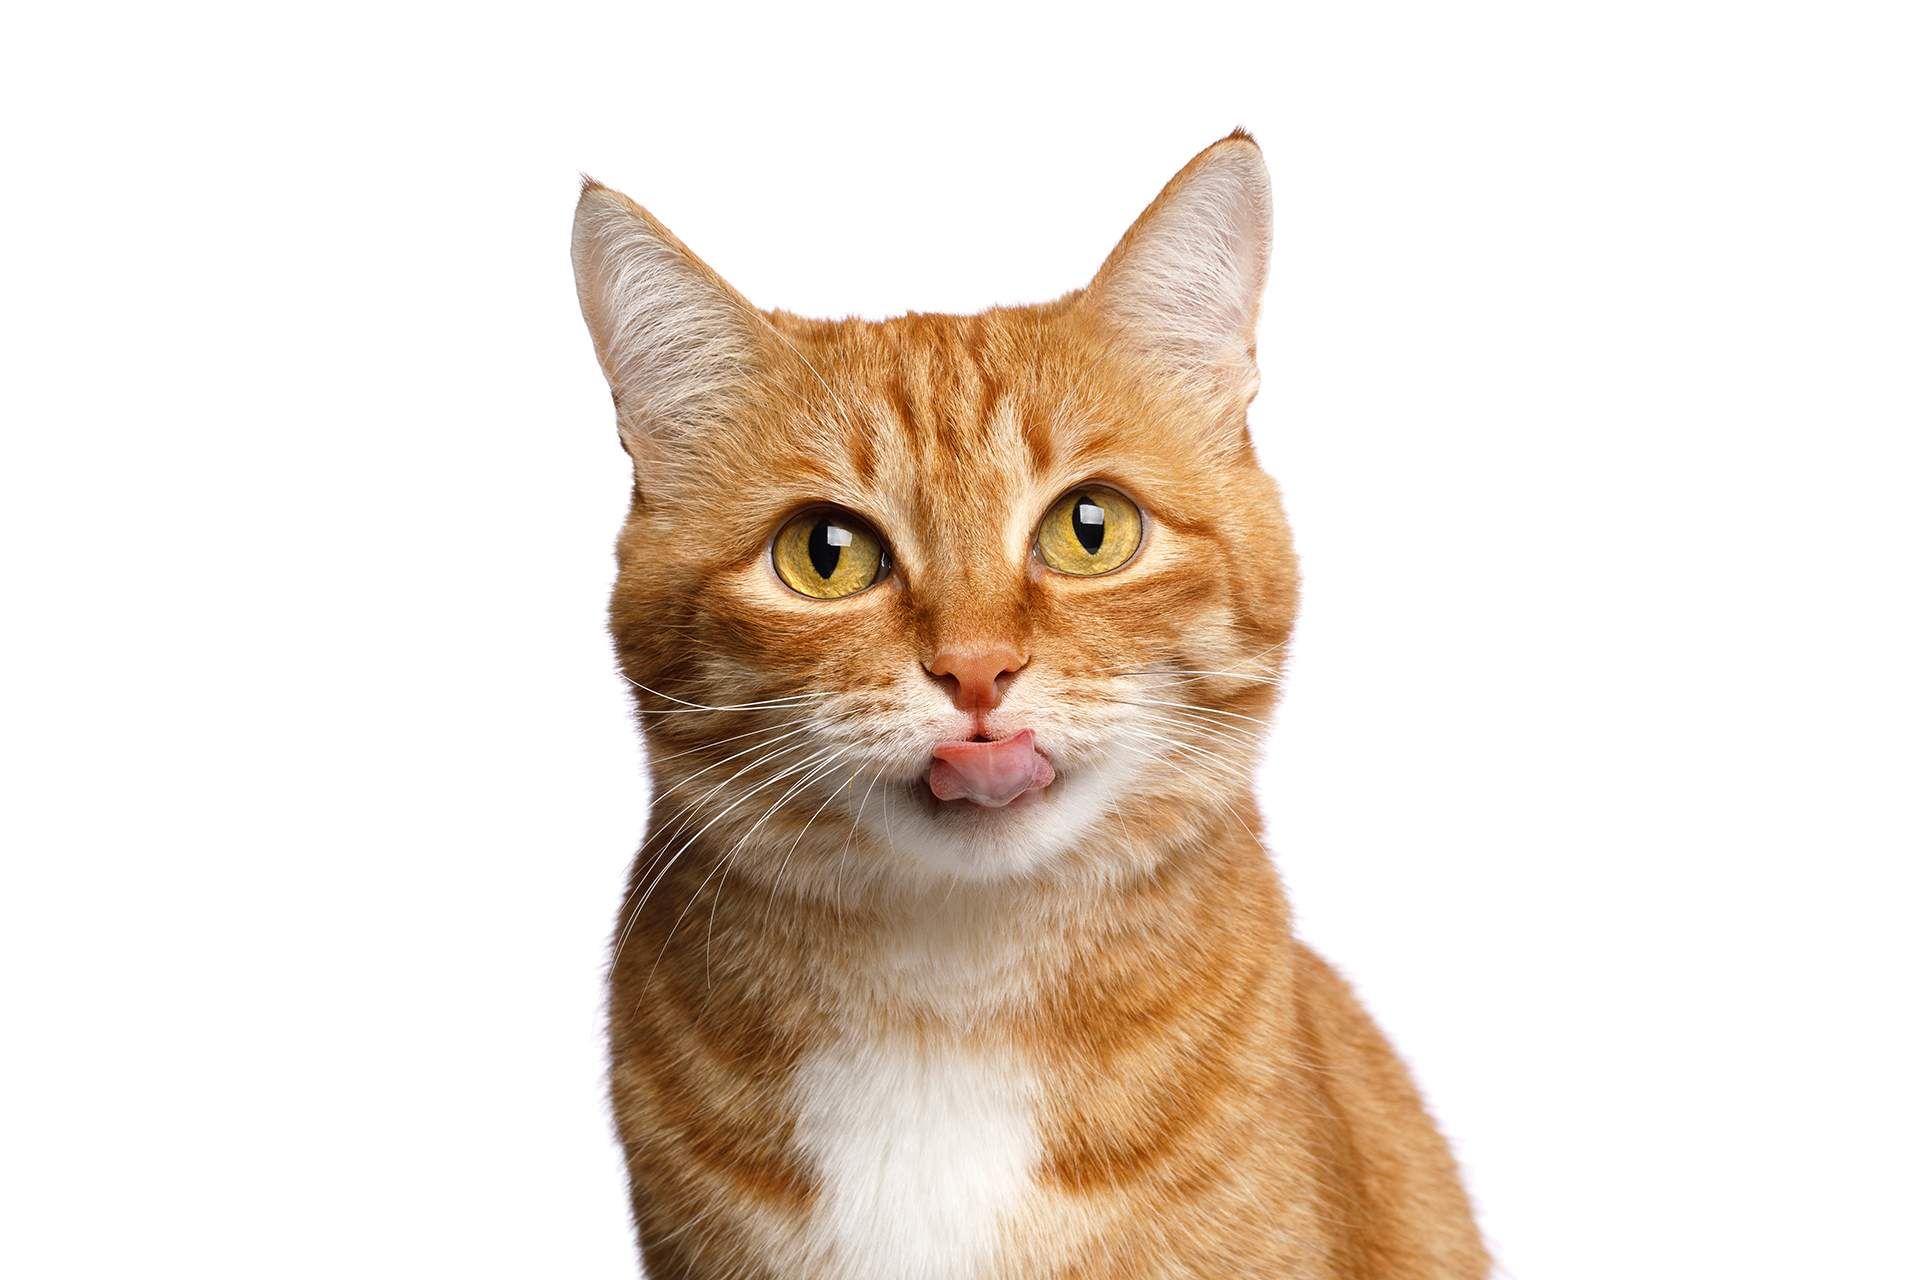 a close up of an orange and white cat sticking its tongue out .